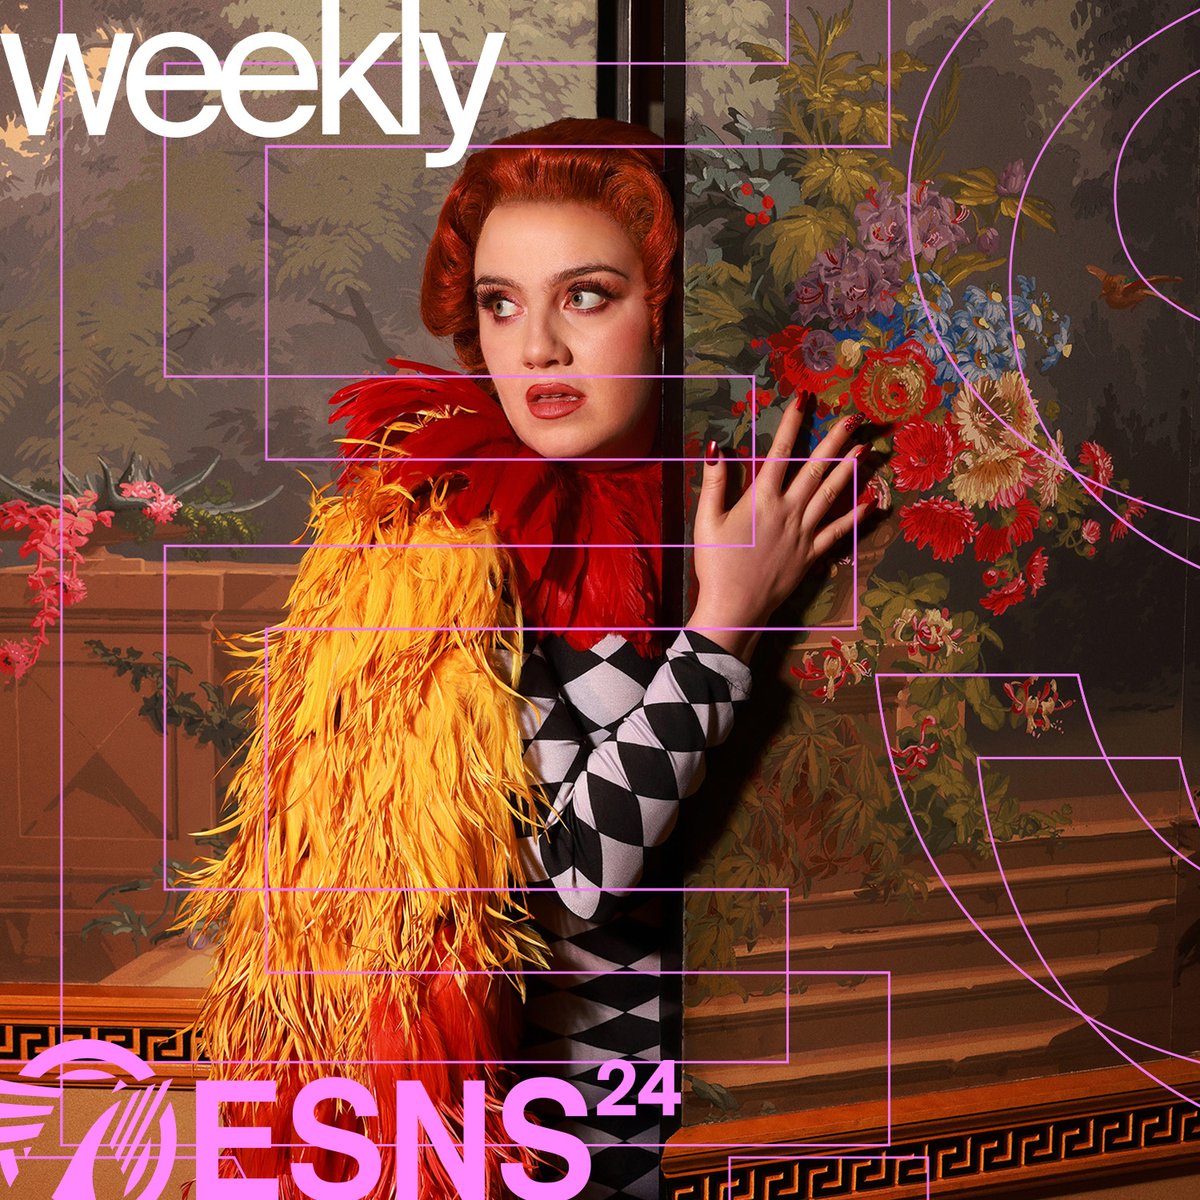 The ESNS Weekly Playlist is back! Tune in now to hear the latest releases from #ESNS24 artists, including tracks from @cmatbaby, #SophieStraat, #Brockhoff, #ELASI, #Steeby and more. sdz.sh/T18YgK